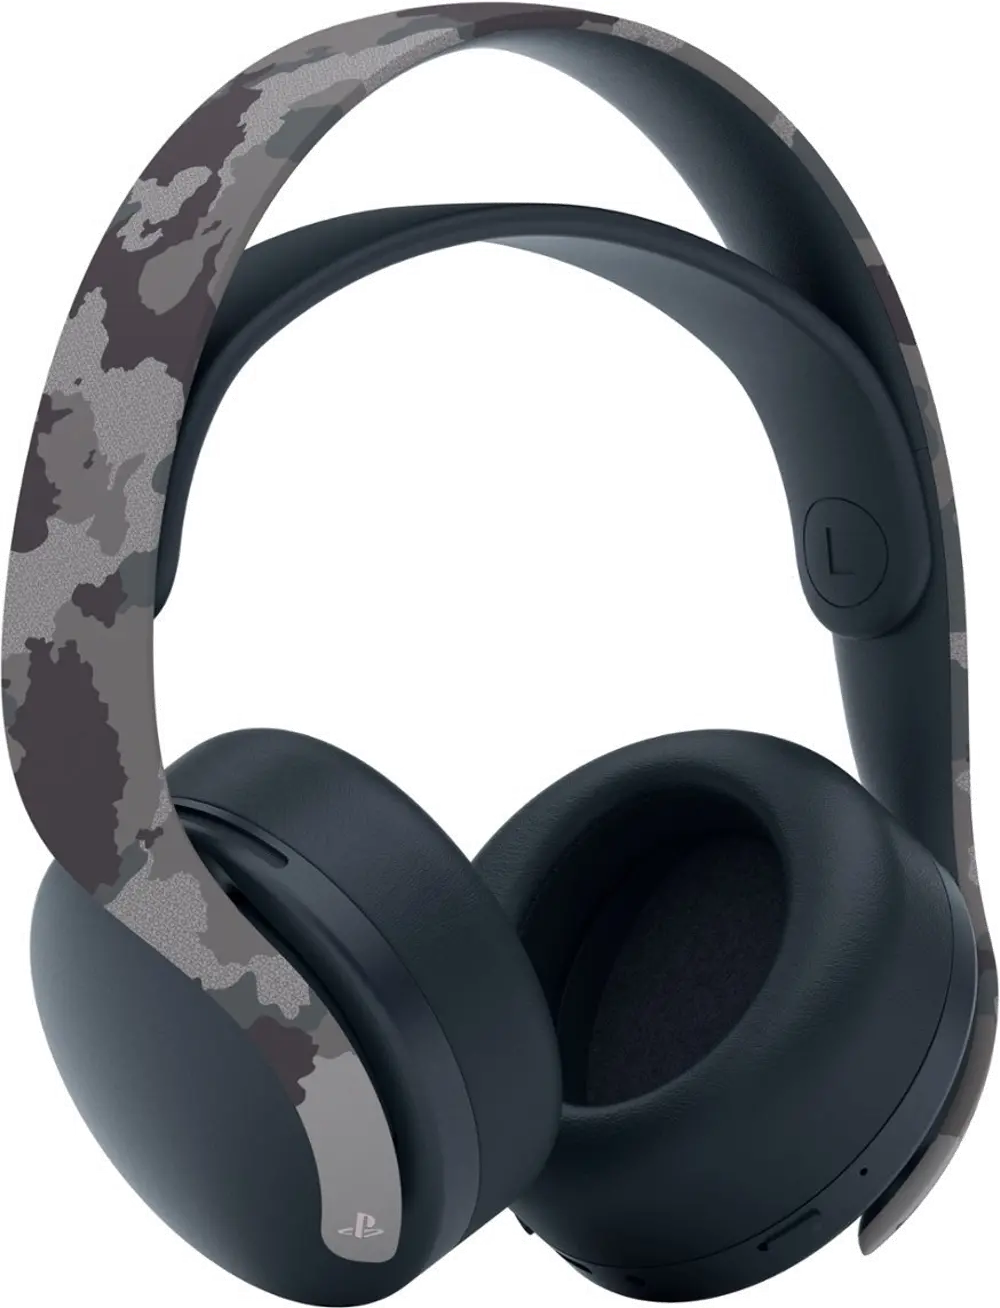 PS5/PULSE_3D_G-CAMO Sony PULSE 3D Wireless Gaming Headset for PS5, PS4, and PC - Gray Camouflage-1